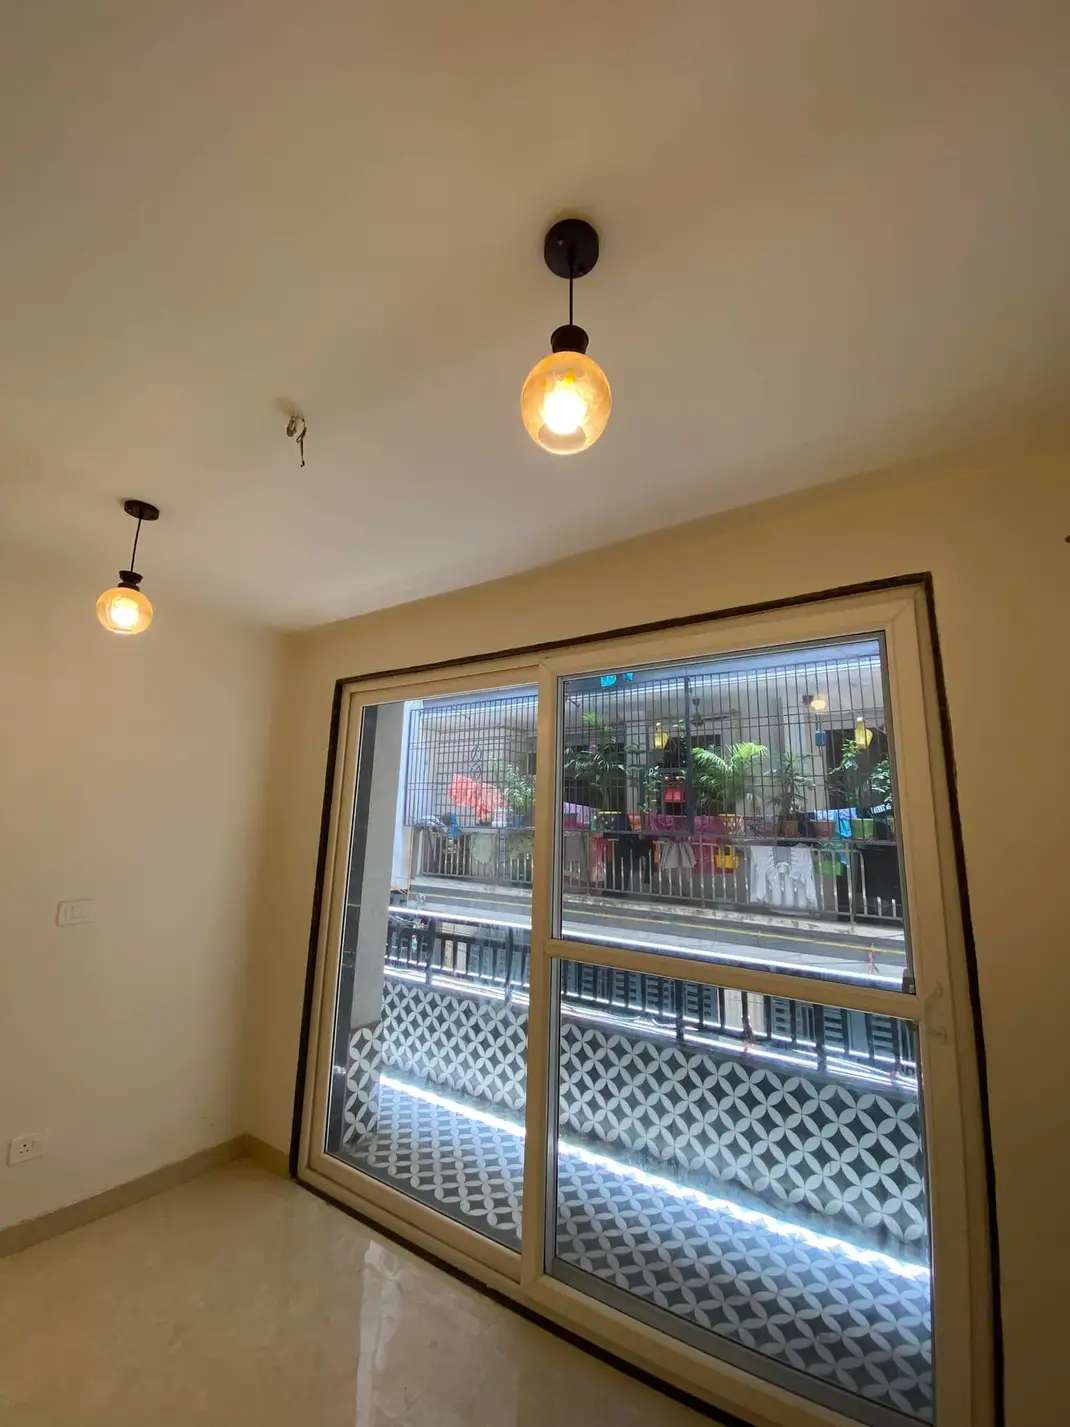 2 Bed/ 2 Bath Rent Apartment/ Flat, Semi Furnished for rent @Chhatarpur enclave phase 2 South Delhi